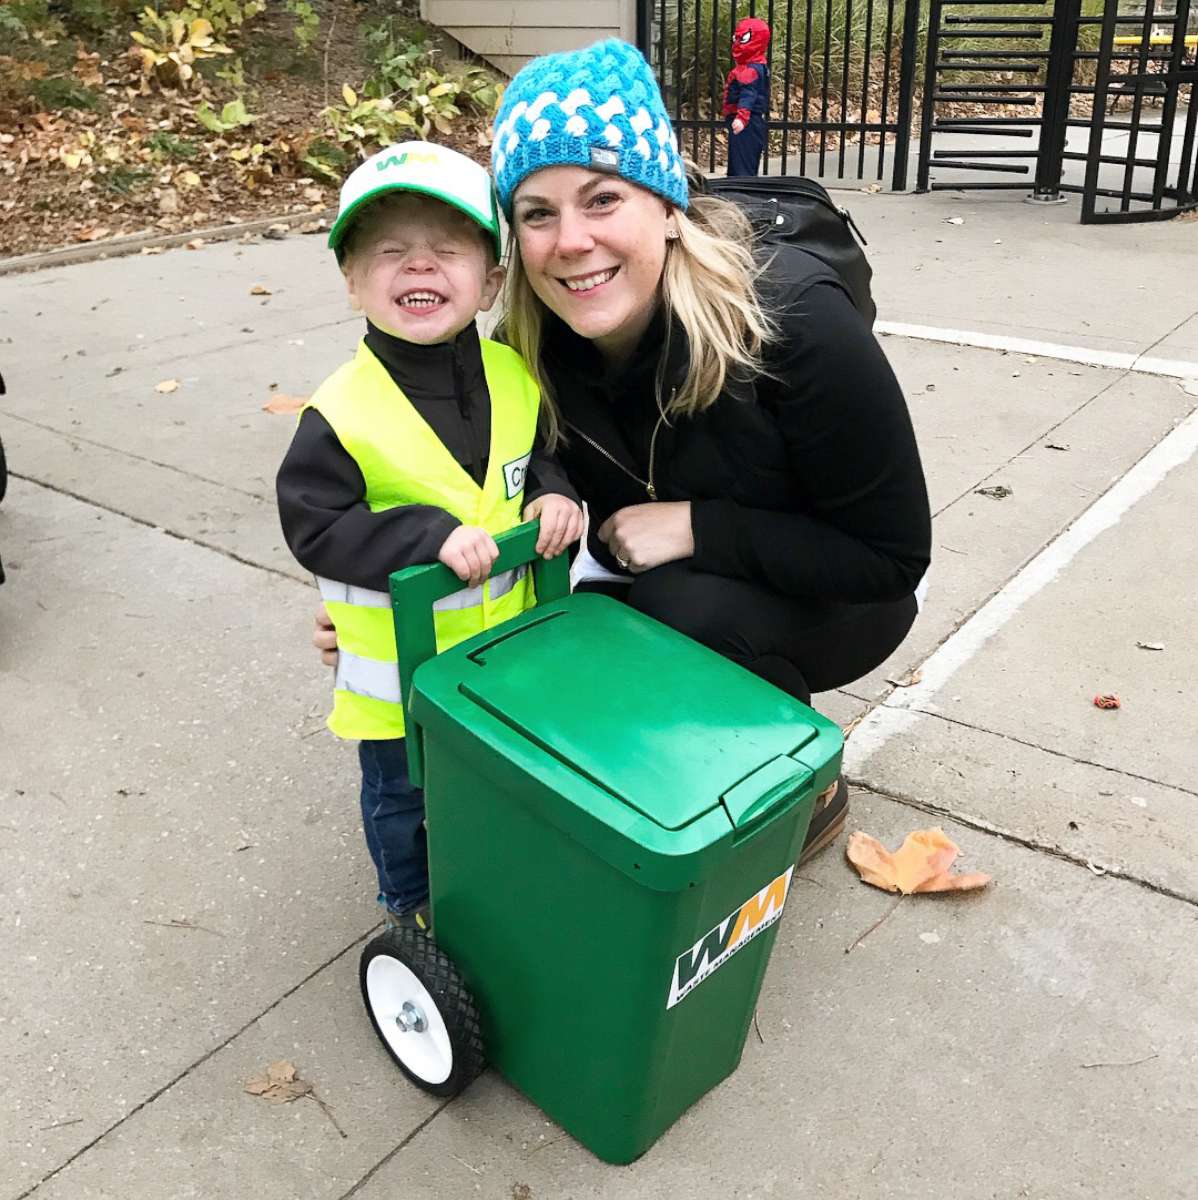 PHOTO: Crew Smith, 3, seen with his mother, Liz Smith, on Halloween in 2017.